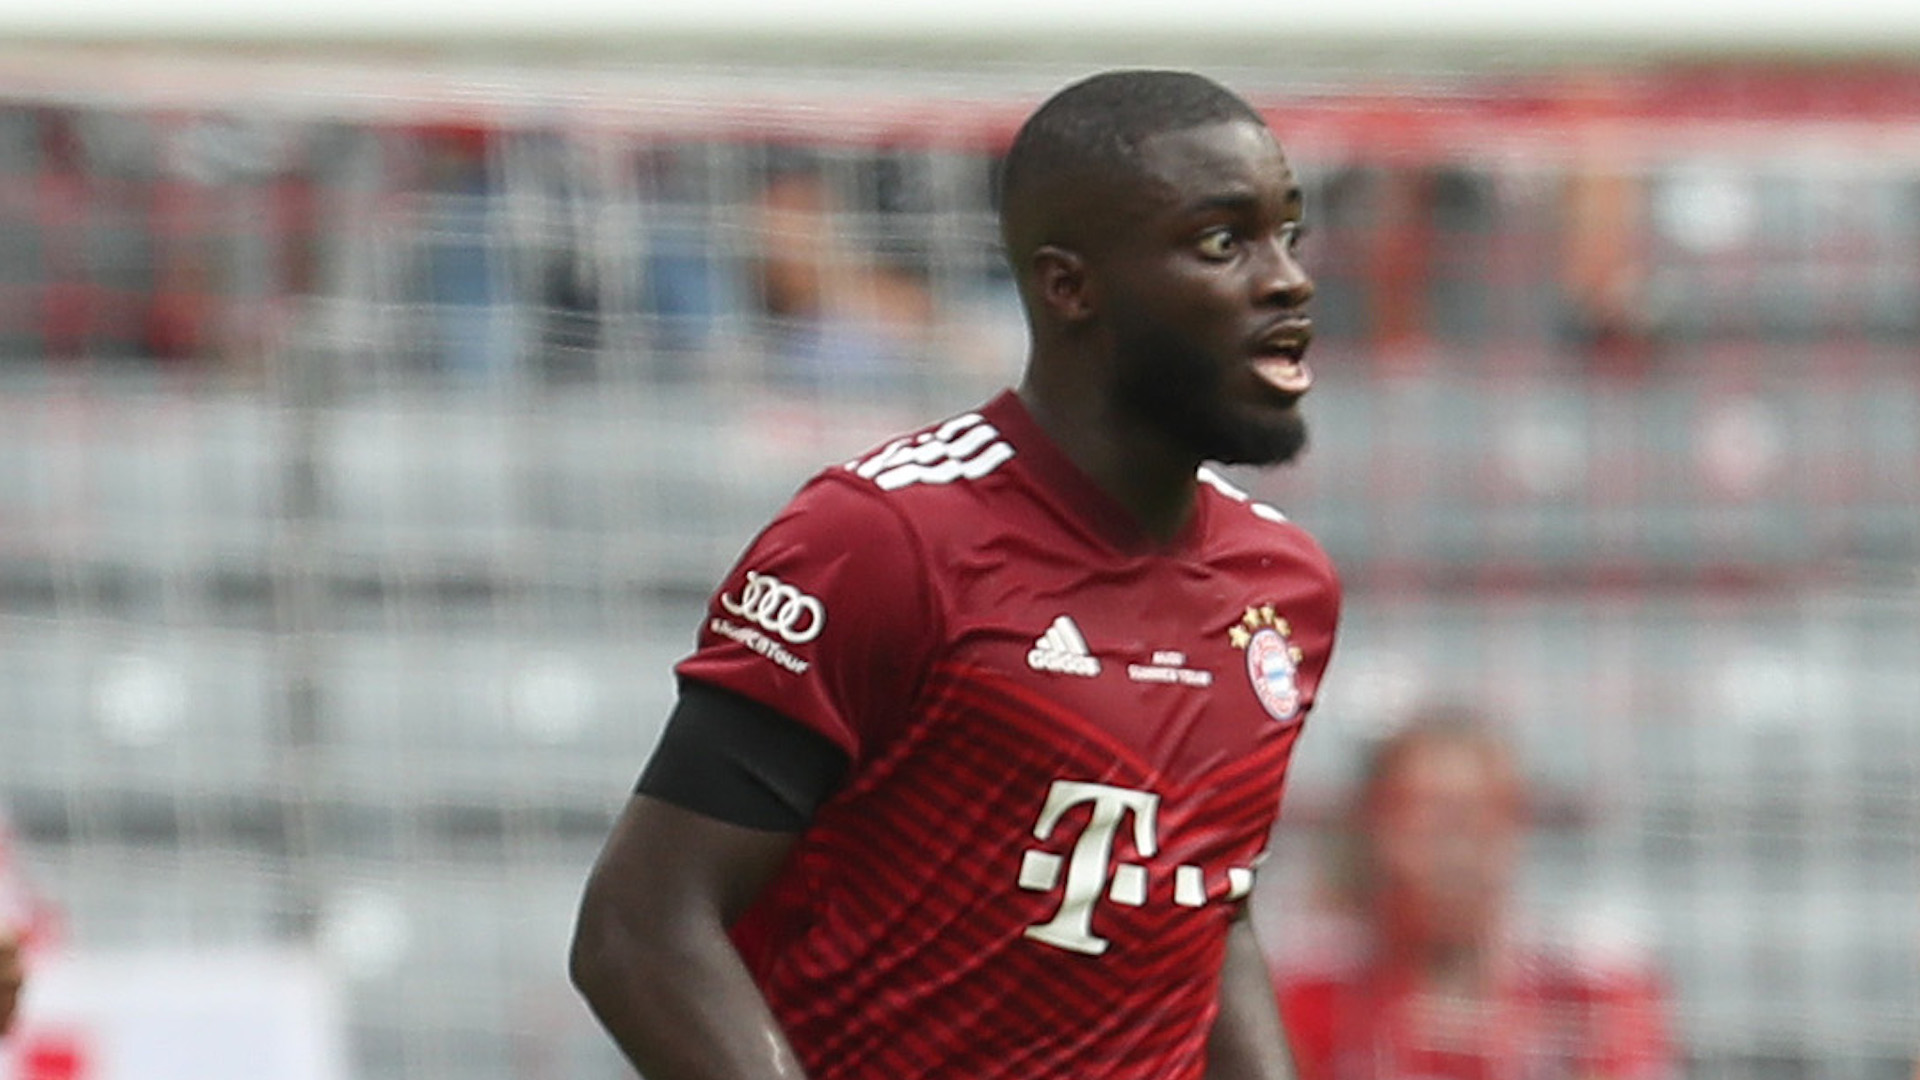 He Became A Machine' Star Upamecano 'shy' Off Pitch But A 'beast' On It, Says Ex RB Salzburg Manager Letsch